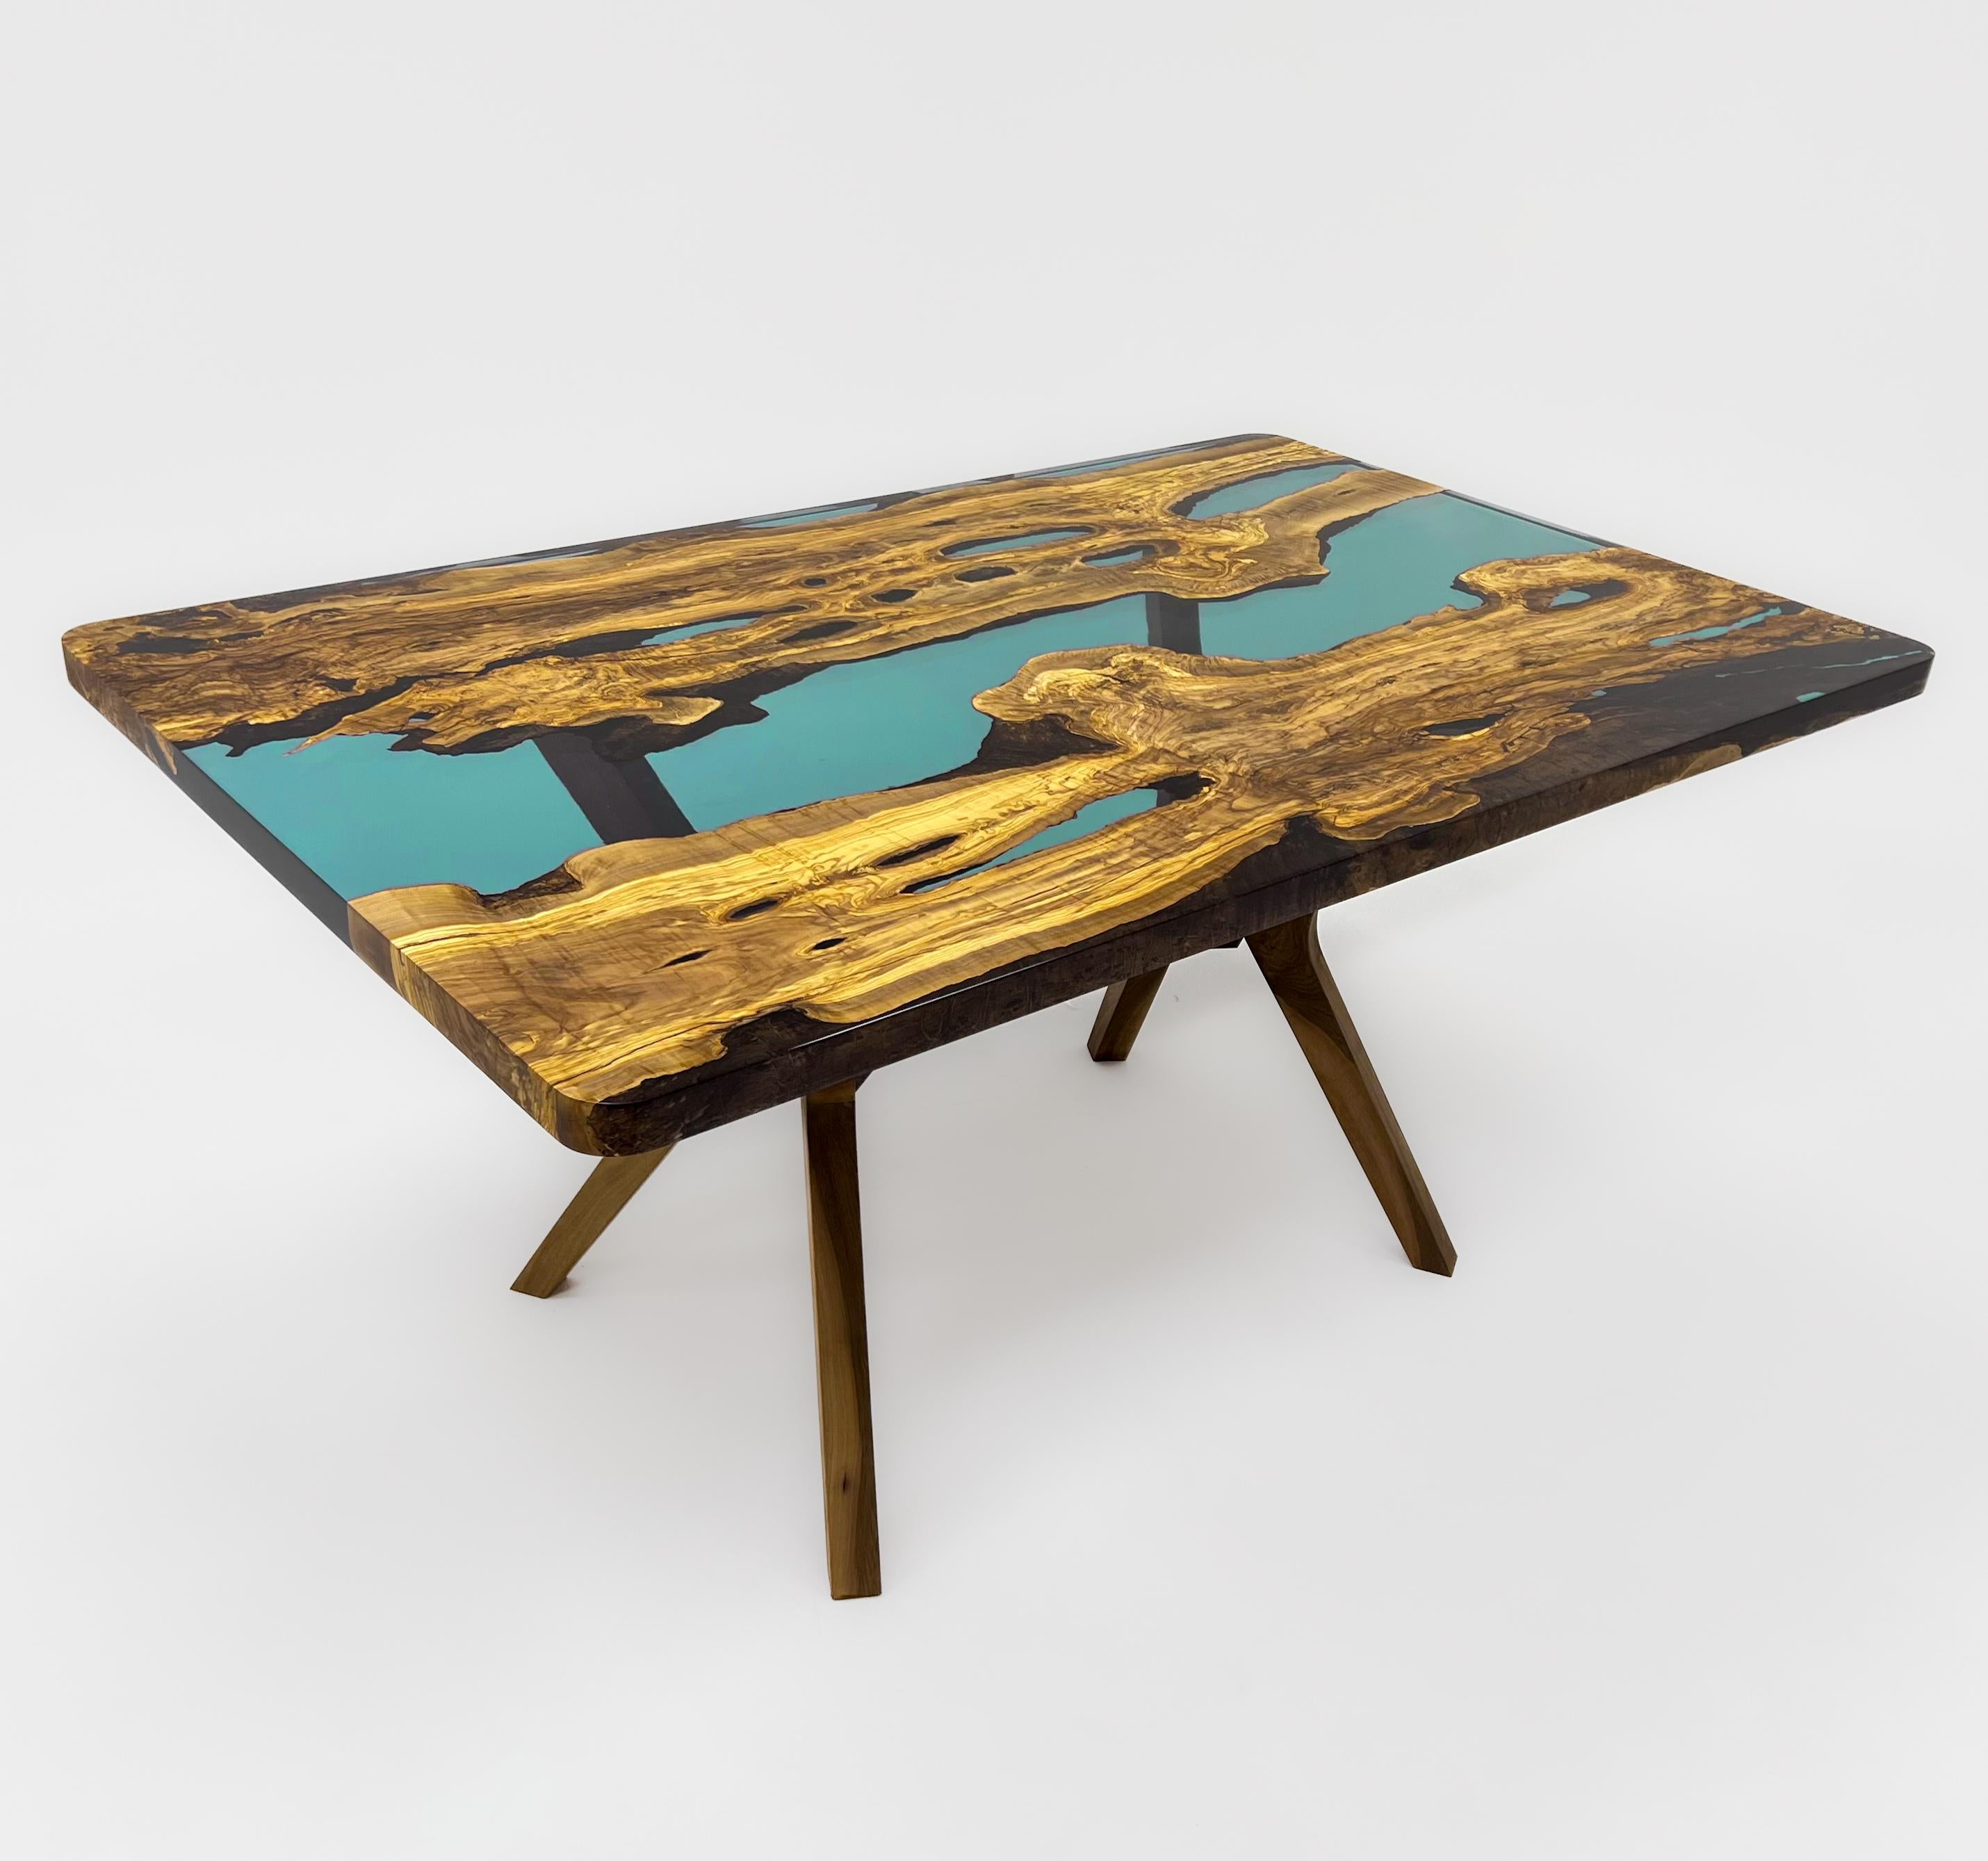 Custom Olive Epoxy Table

This stunning table is made of Mediterranean Olive wood. The unique beauty of the natural curves of olive wood combined with blue epoxy is seen in this table.

All woods have its own natural shape. Therefore, each one has